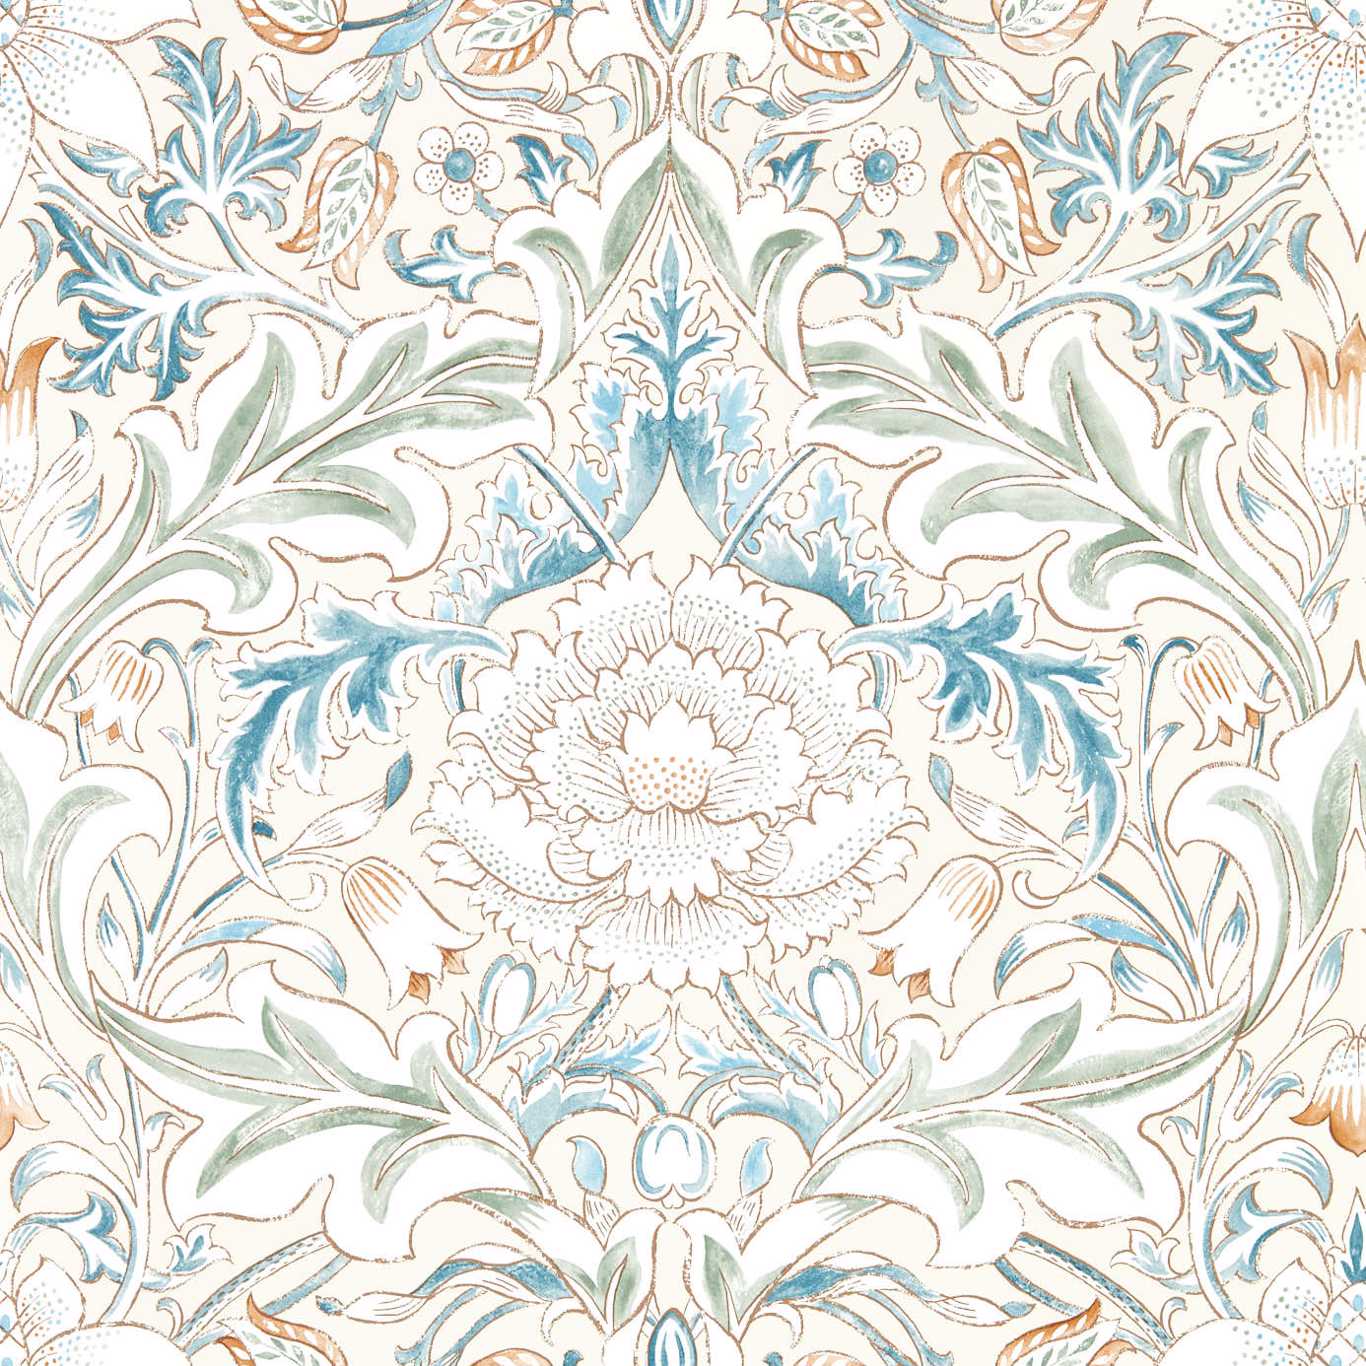 Simply Severn Wallpaper by Morris & Co.